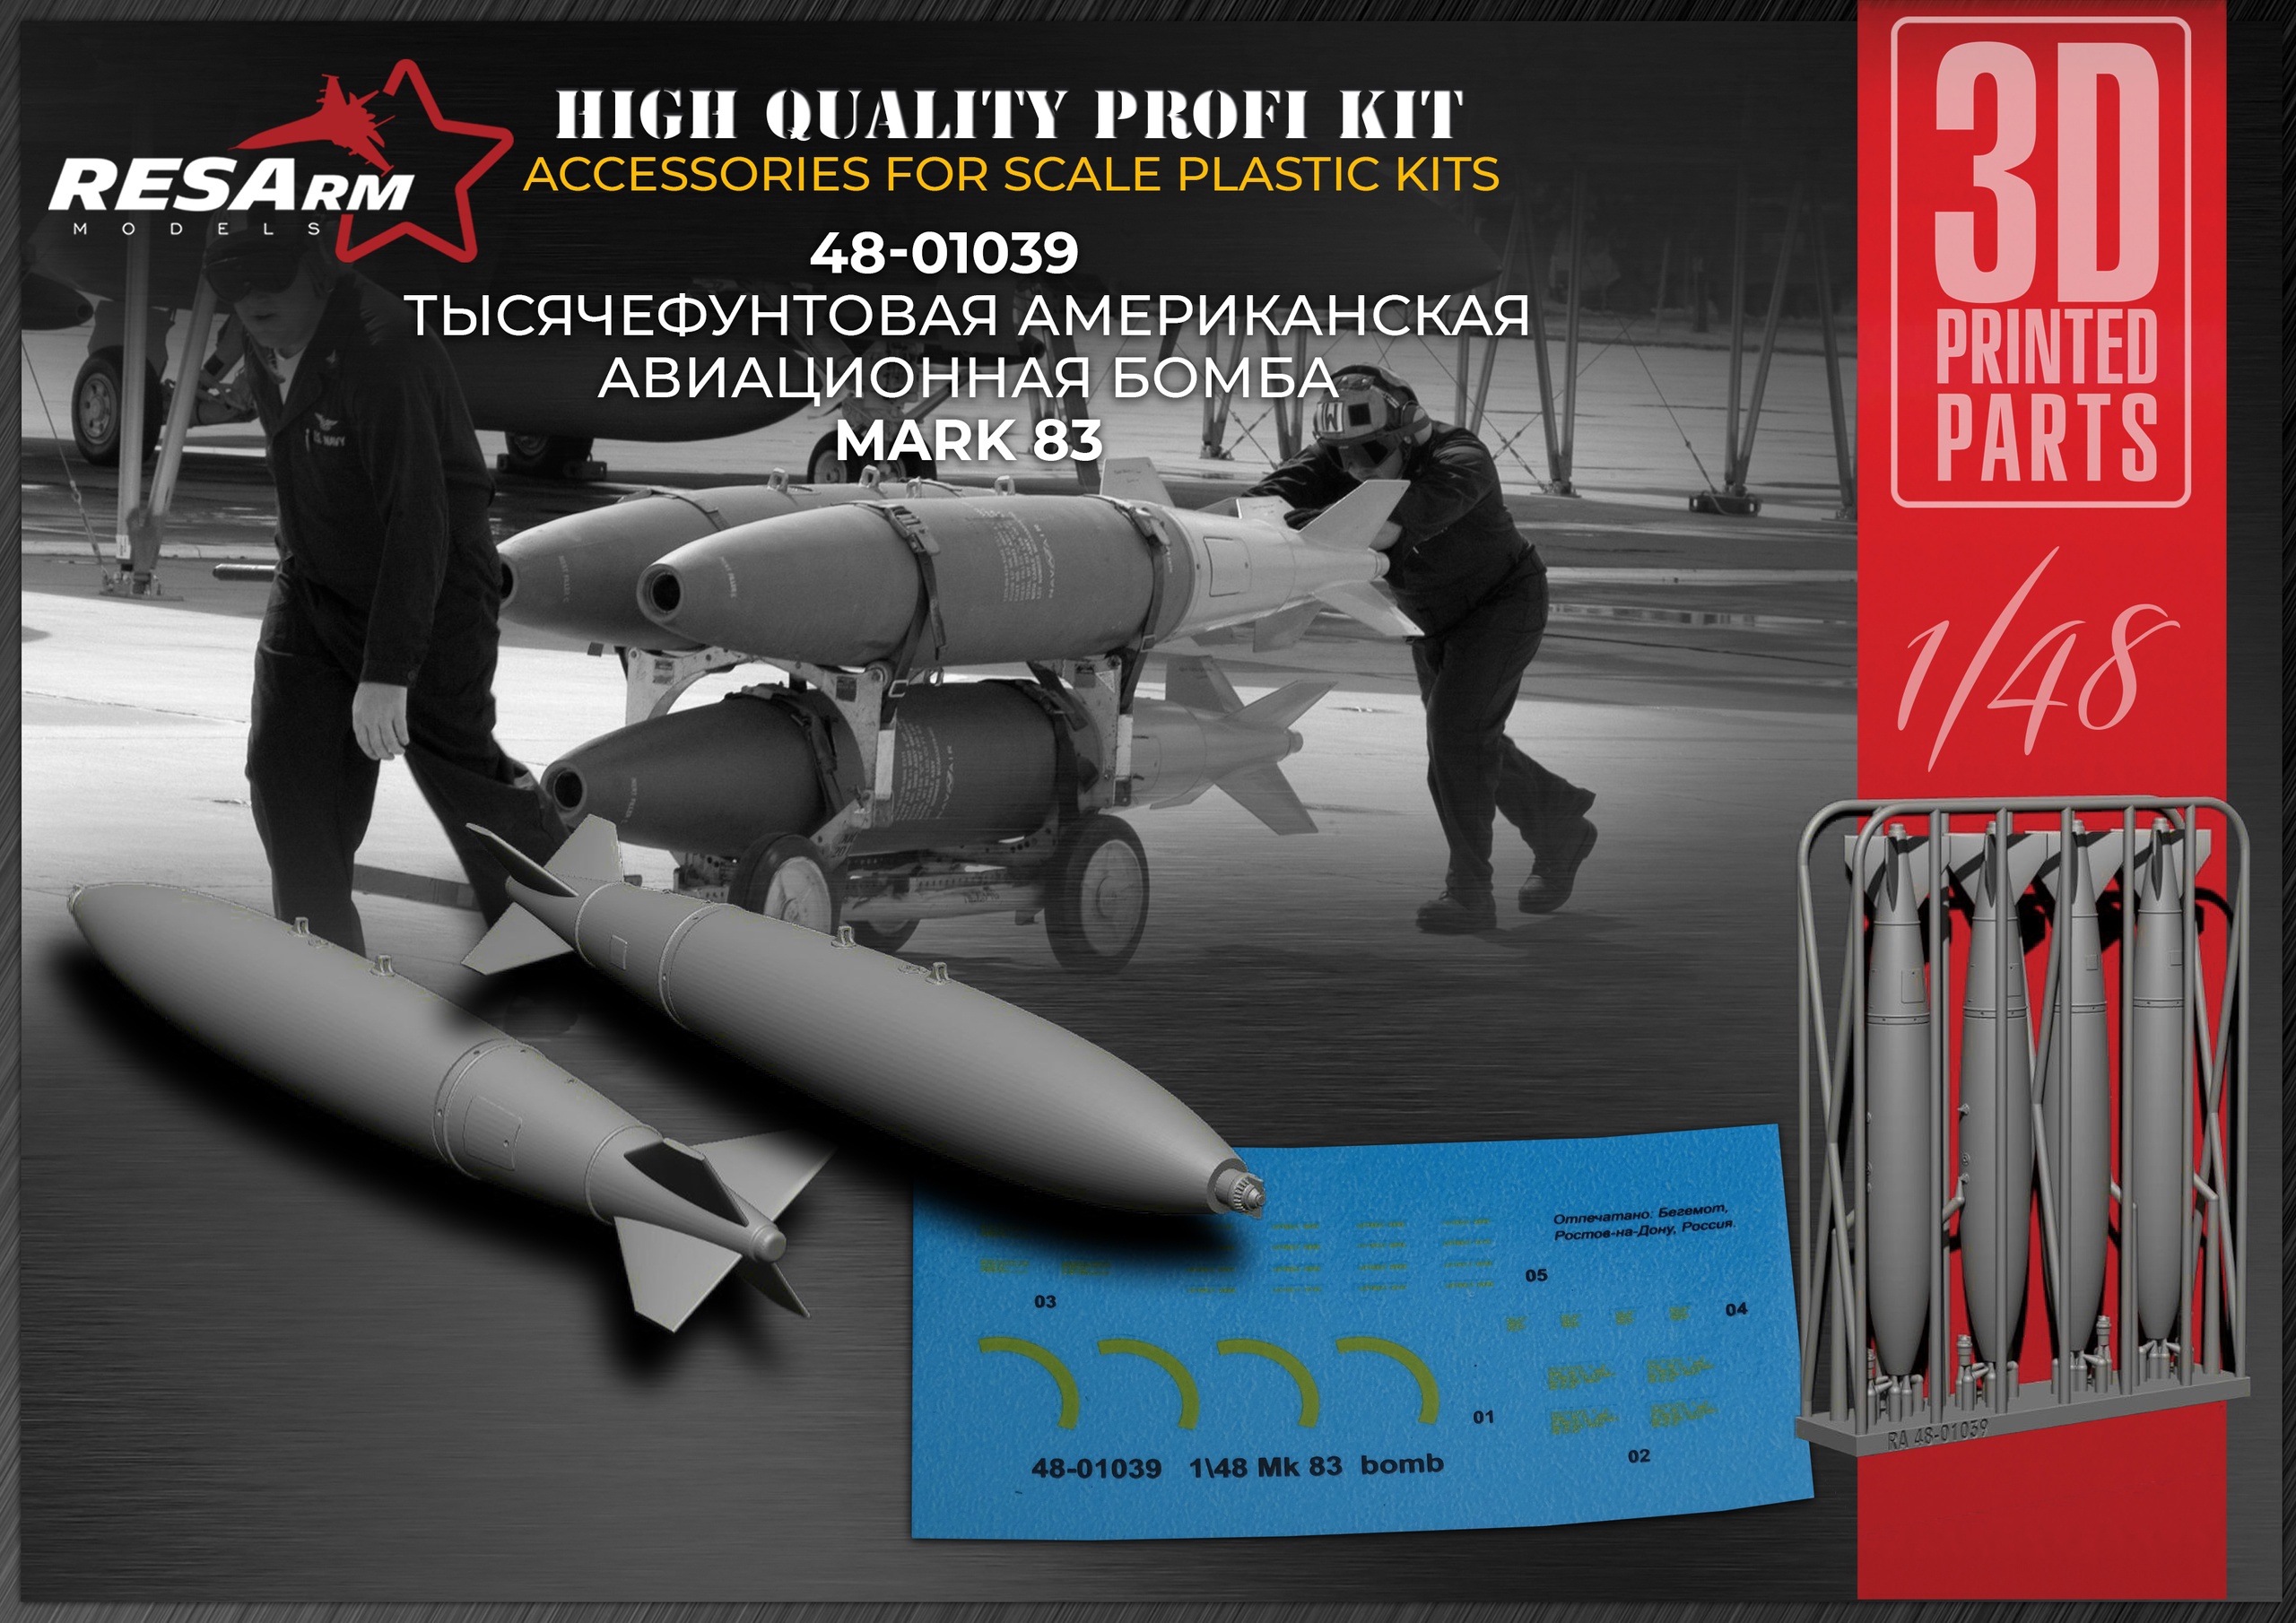 Additions (3D resin printing) 1/48 Mark 83 A thousand-pound American aviation Bomb (RESArm)